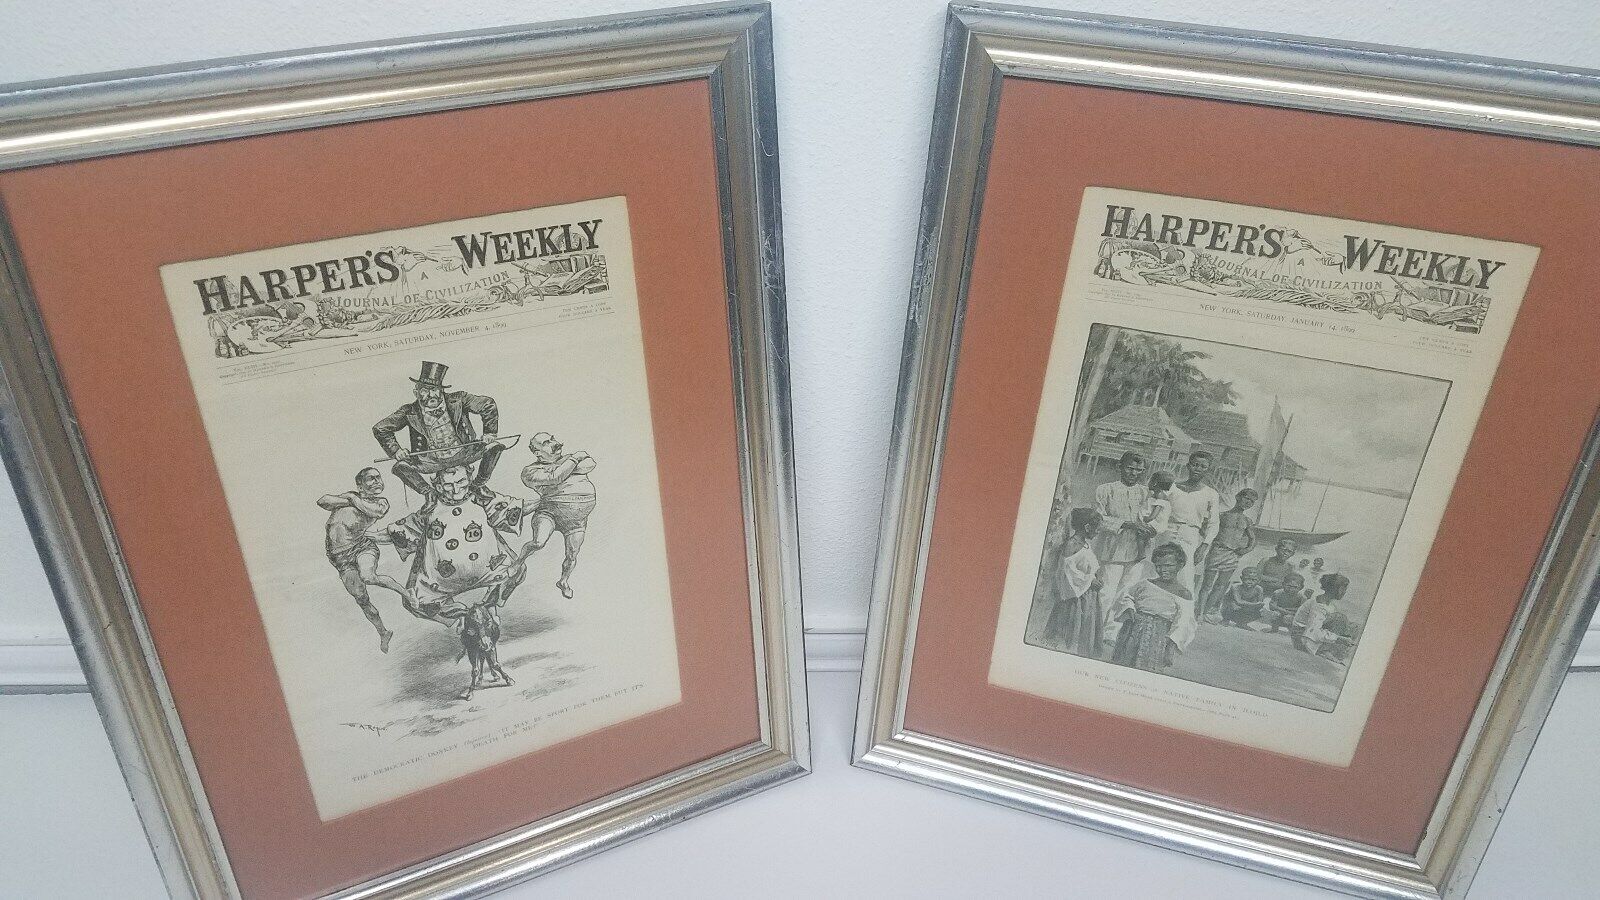 2 AUTHENTIC ORIGINAL 1899 HARPERS WEEKLY FRAMED PAGES. ART GALLERY QUALITY